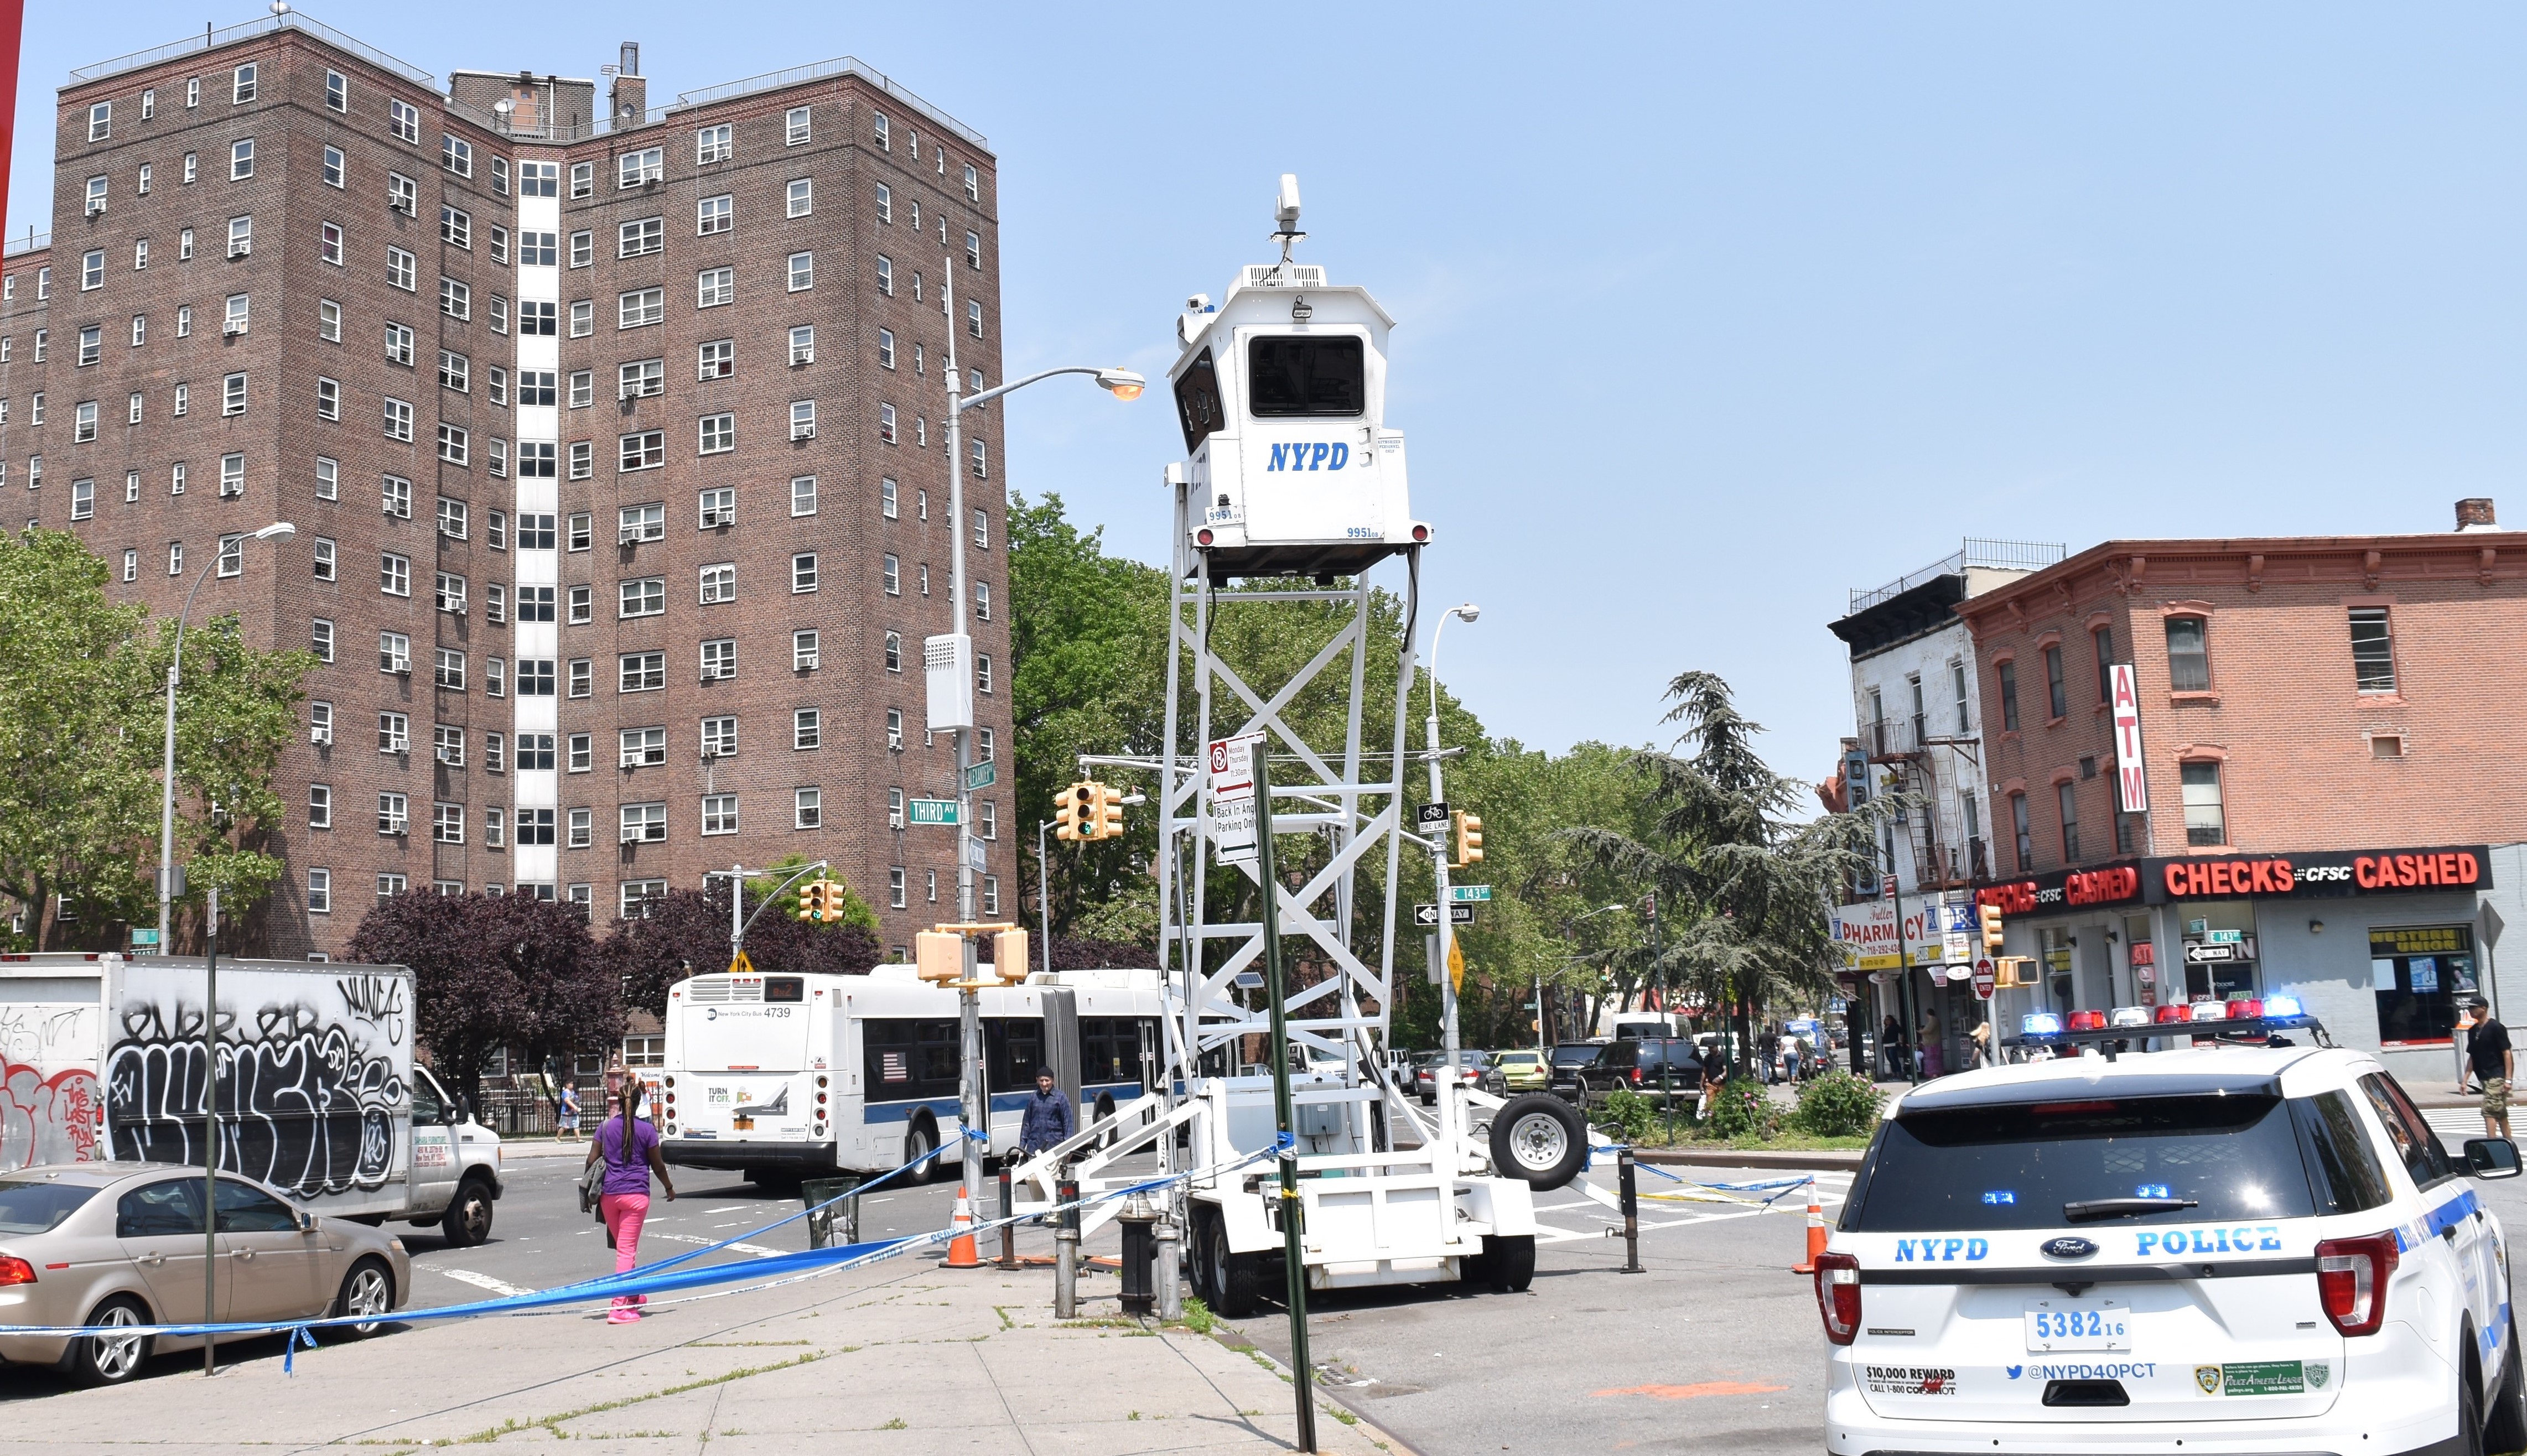 Image of New York Police Department surveillance tower in th